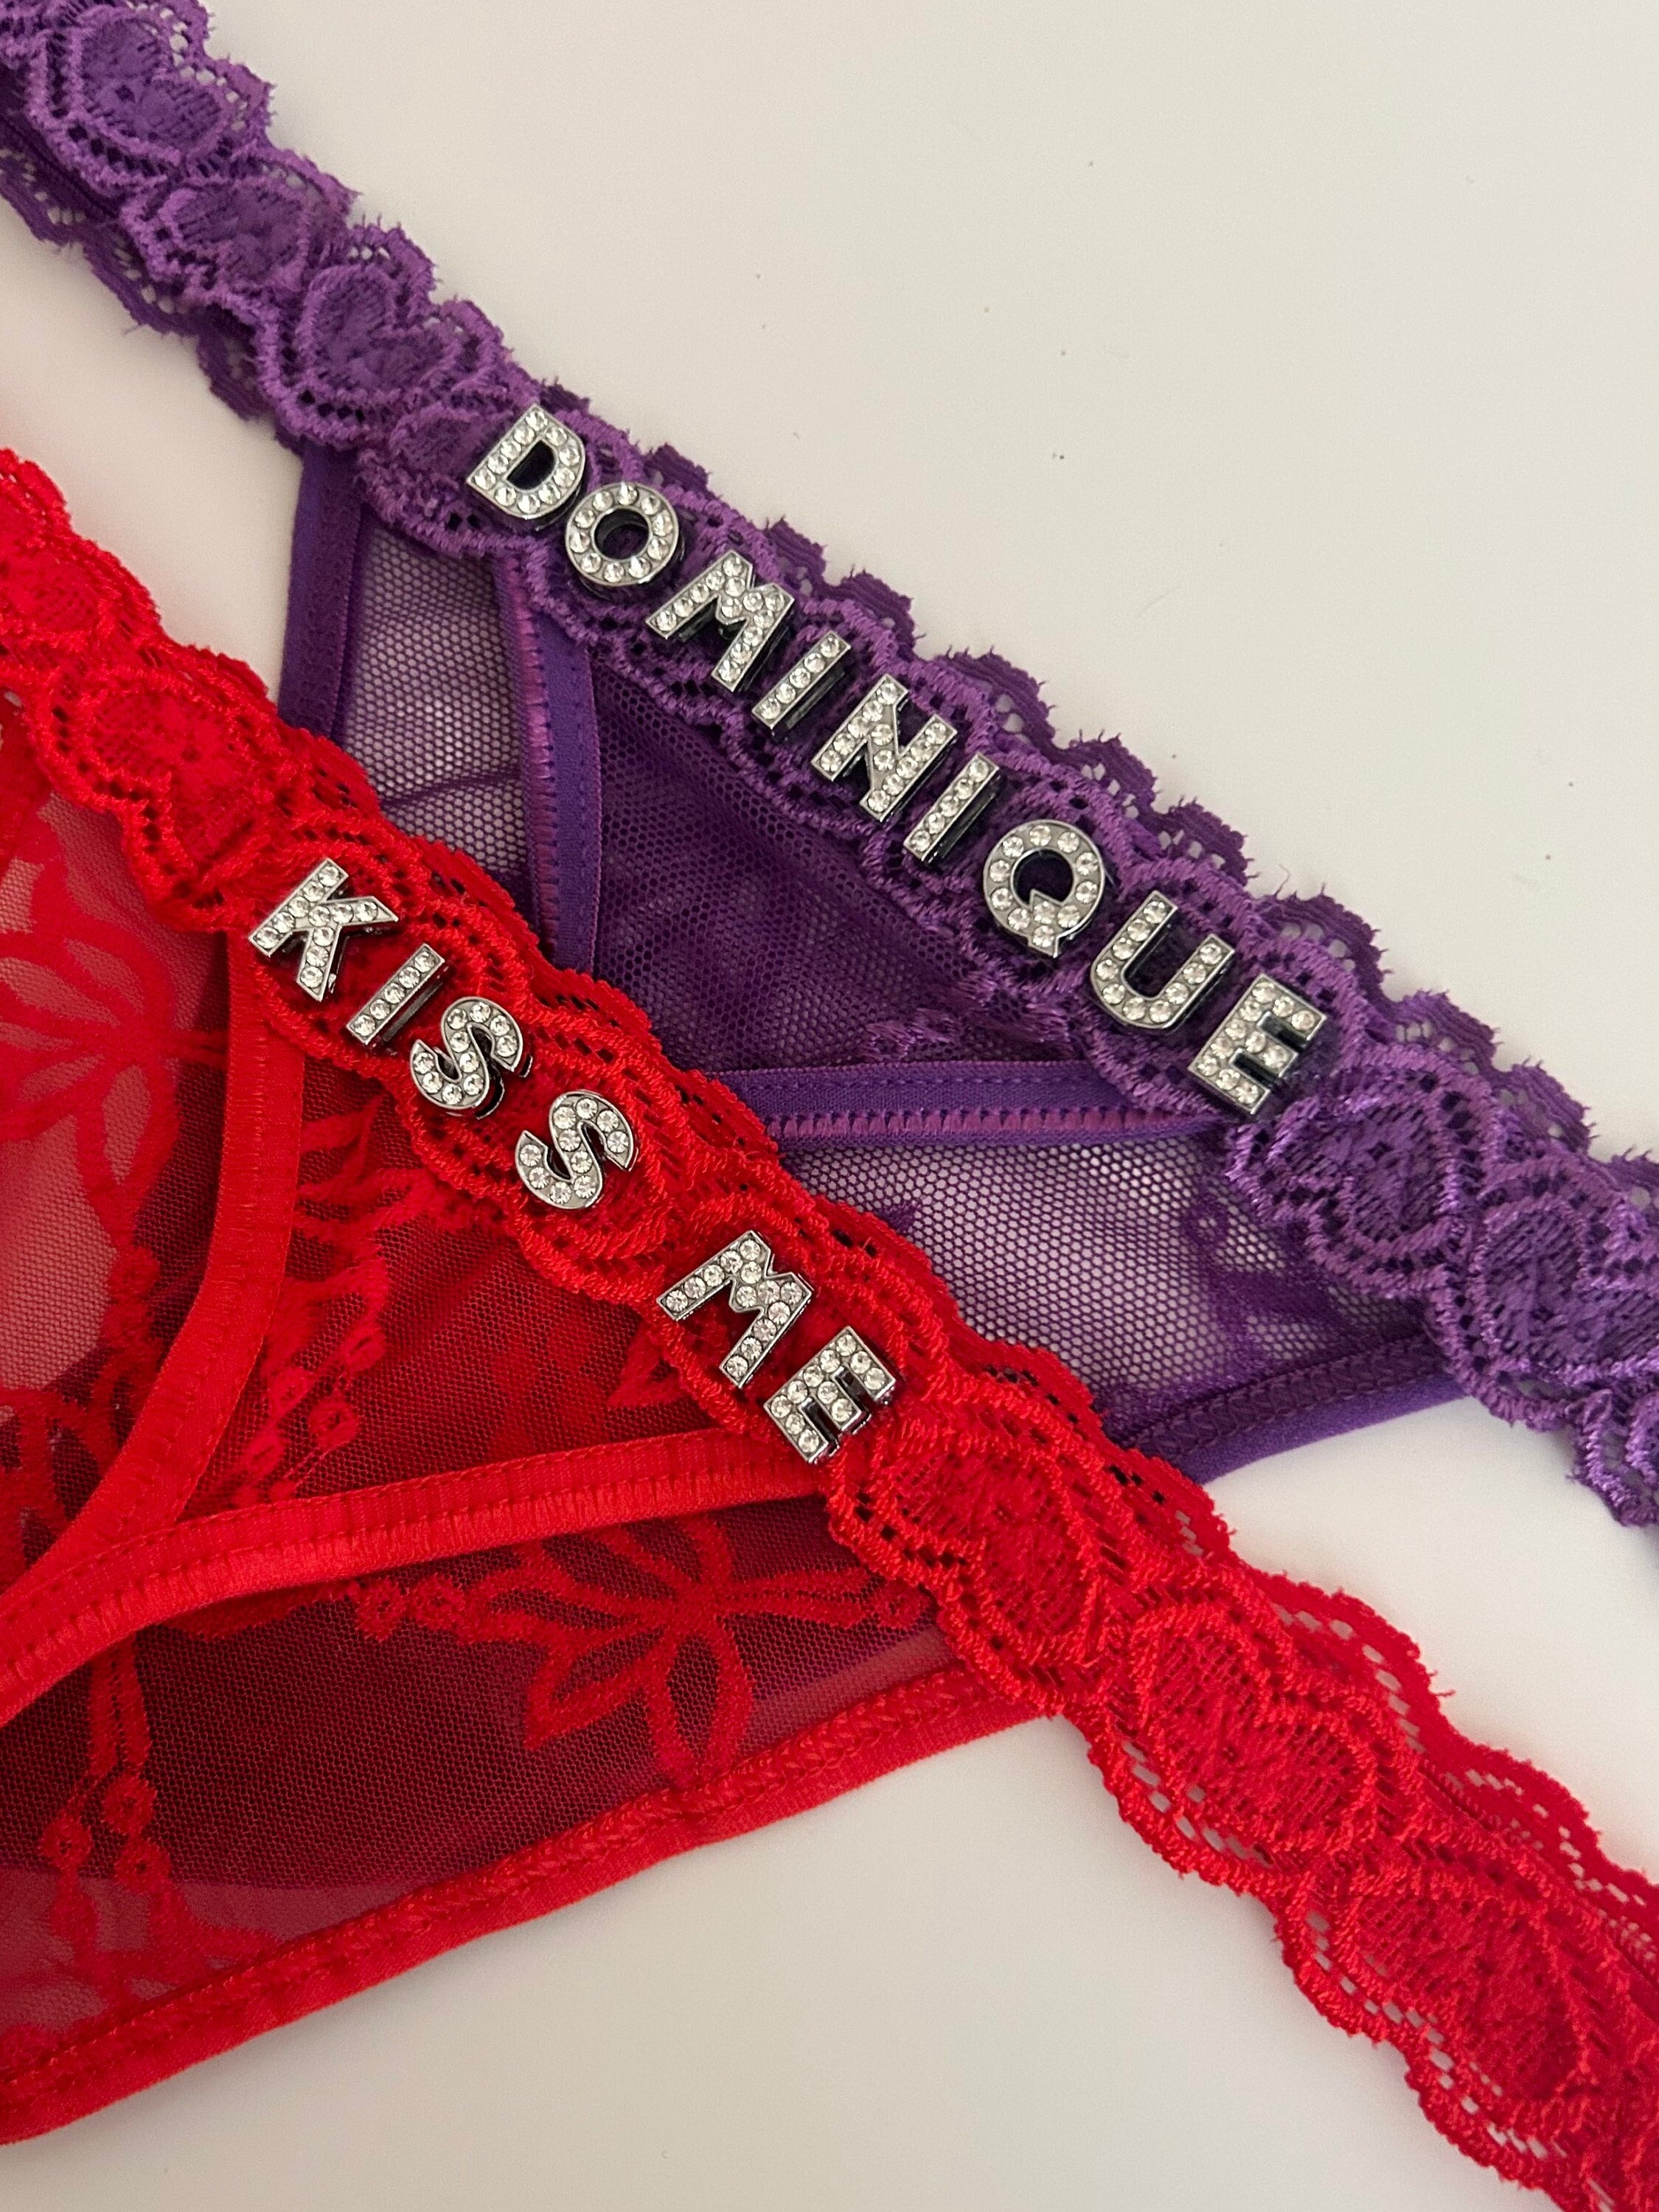 Personalize Your Intimate Wear with Our Custom Name Thong